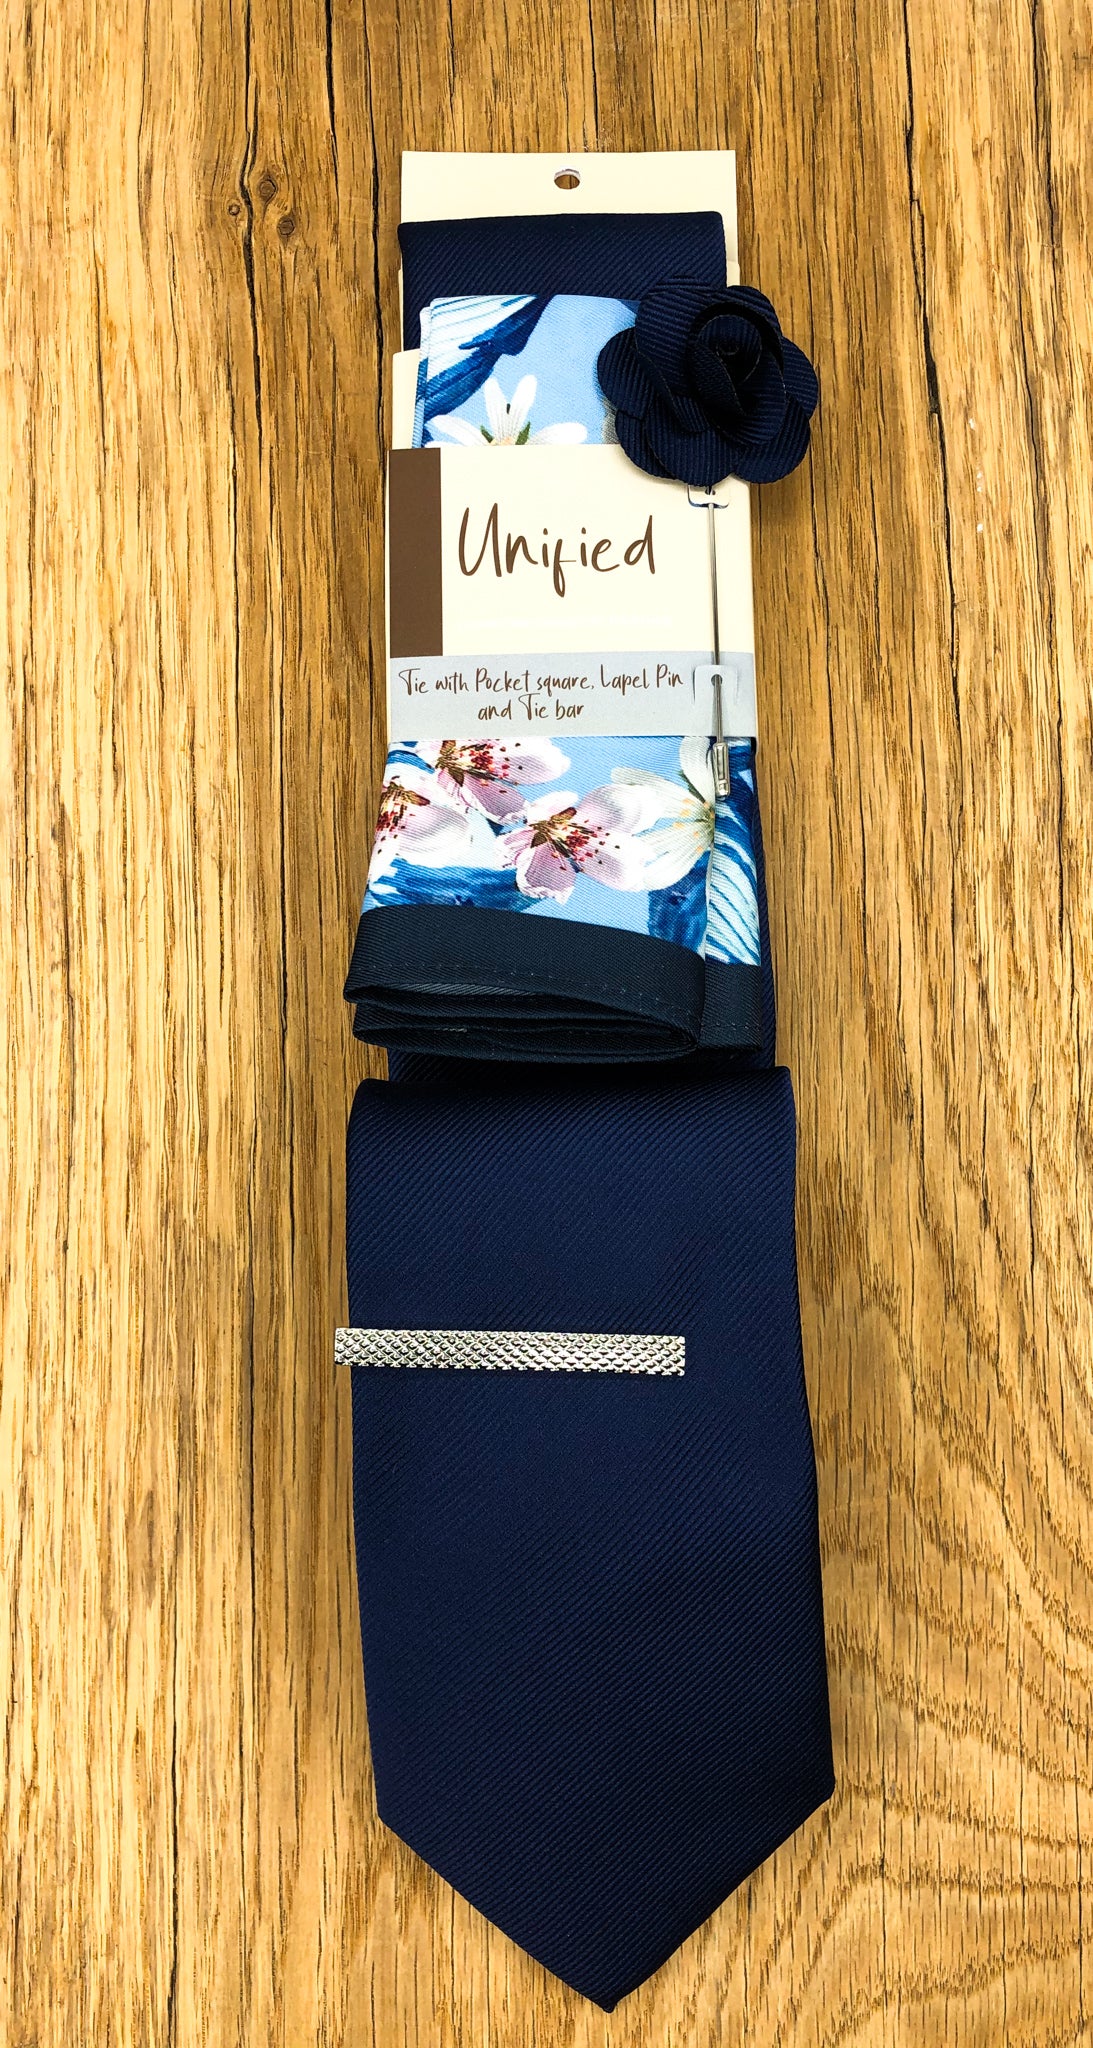 Navy Tie with Floral Pocket Square, Lapel Pin, Tie Bar and Fabric Bag